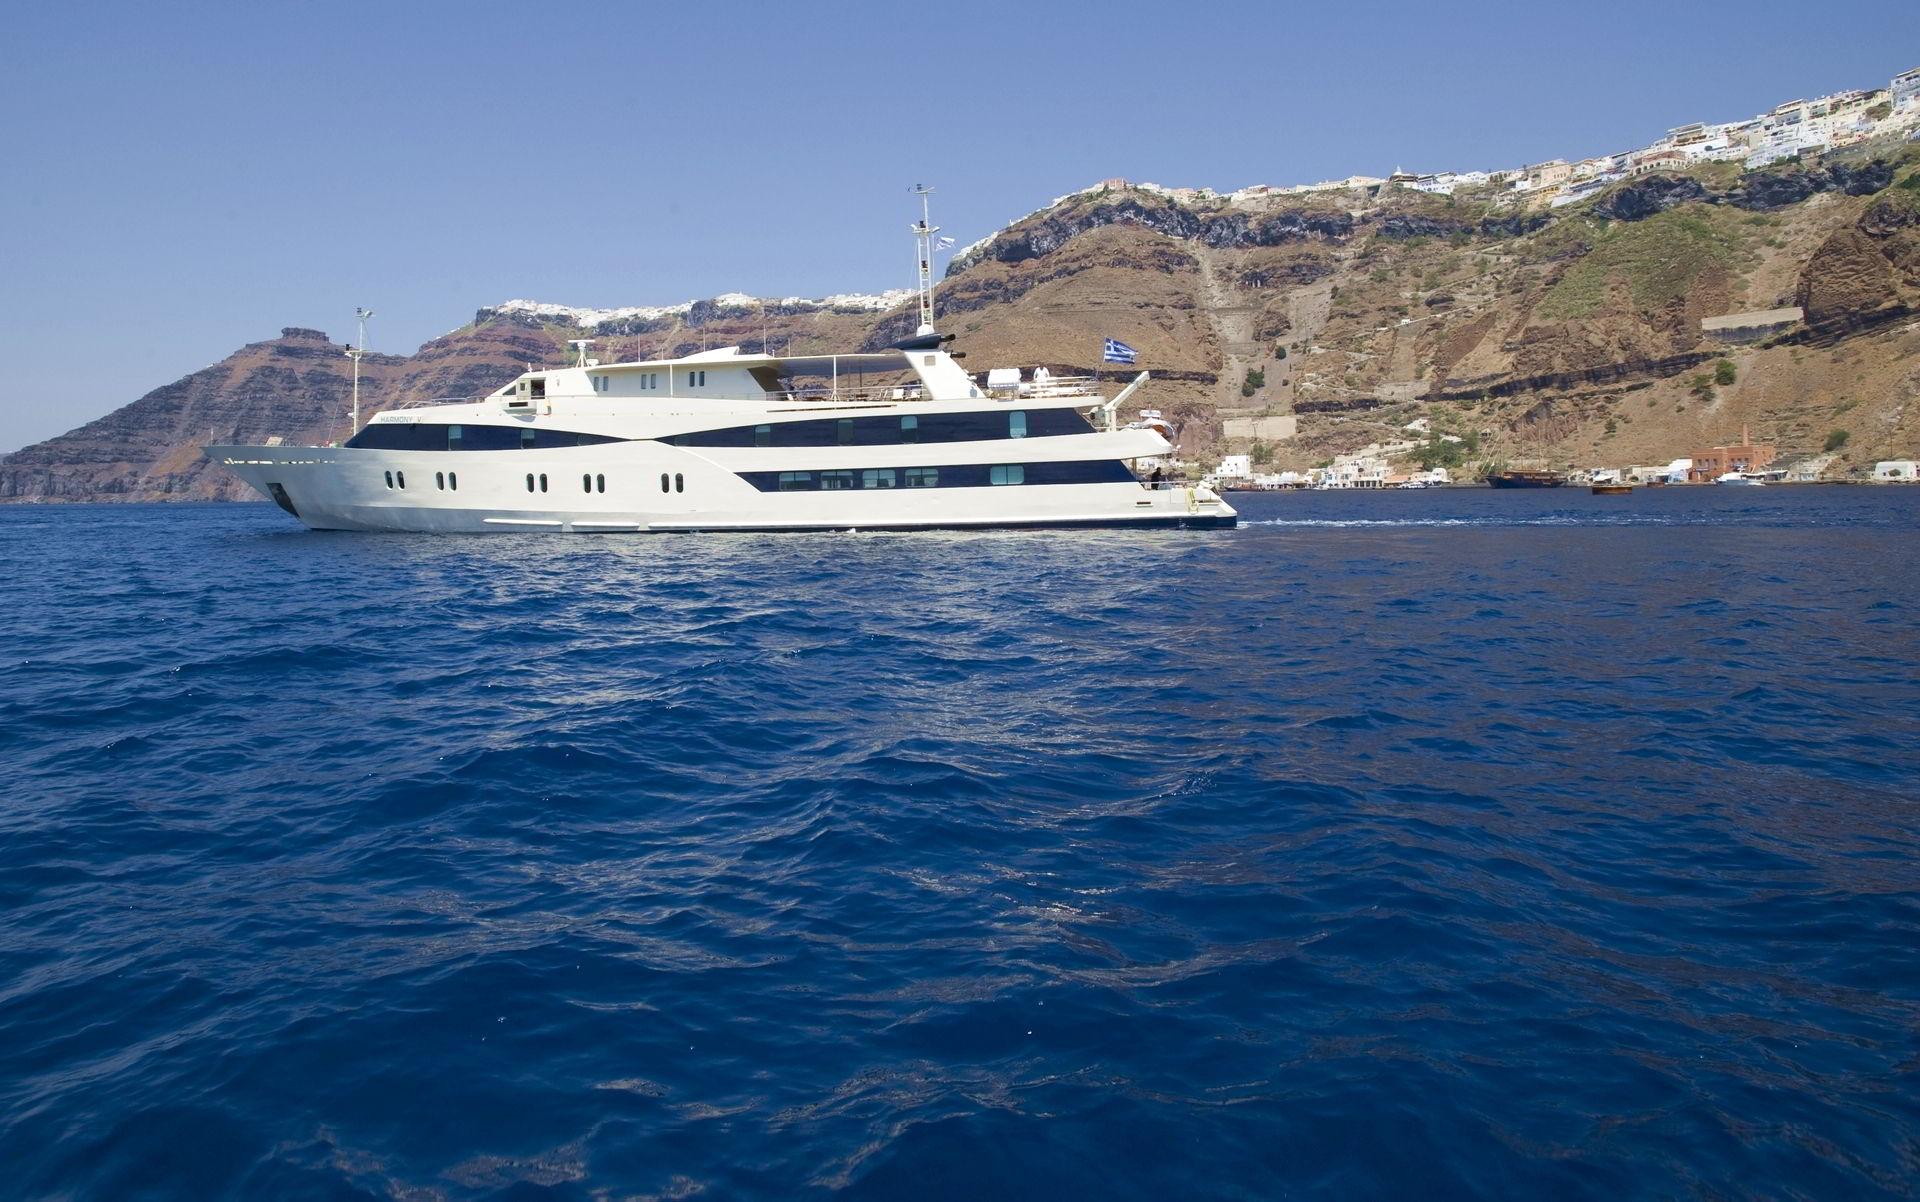 Yacht cruising in the Cyclades